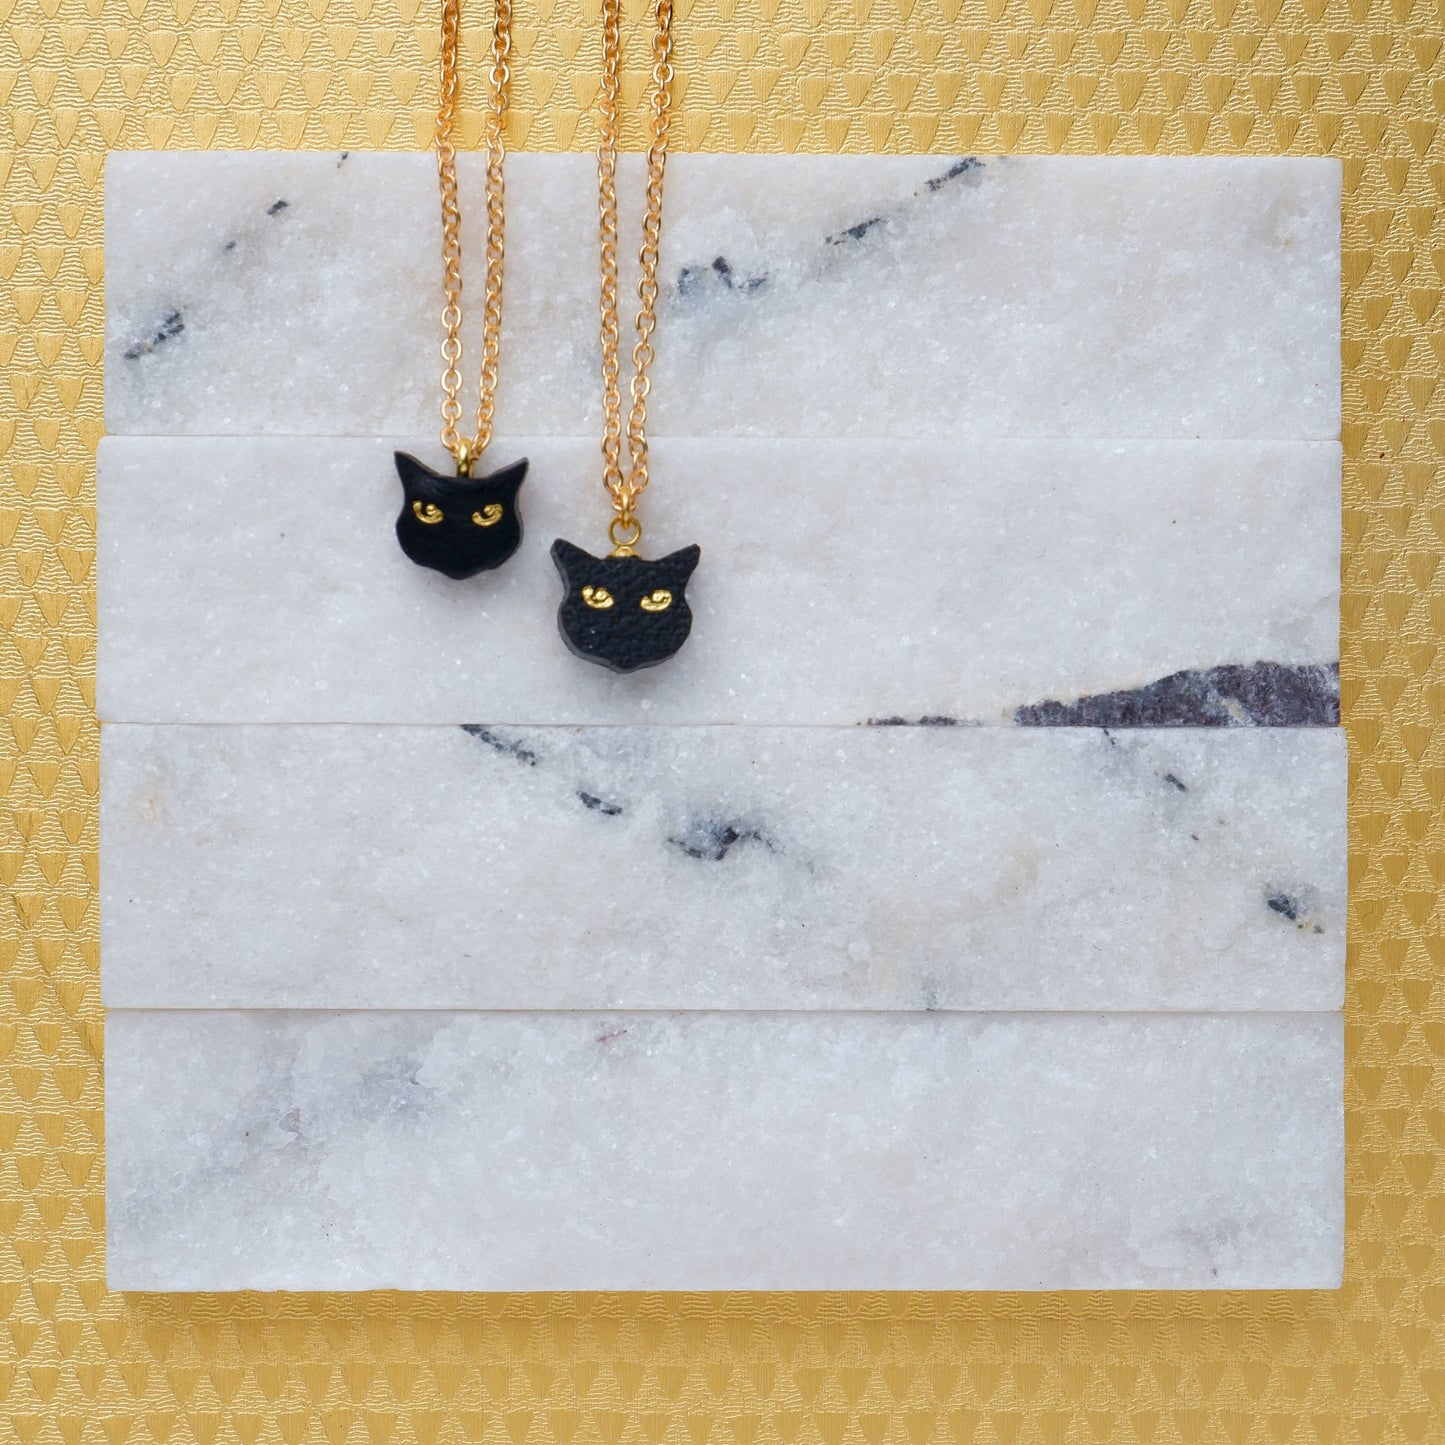 litle black cat head pendants on fine gold chain. 1 is leather, 1 is plant based